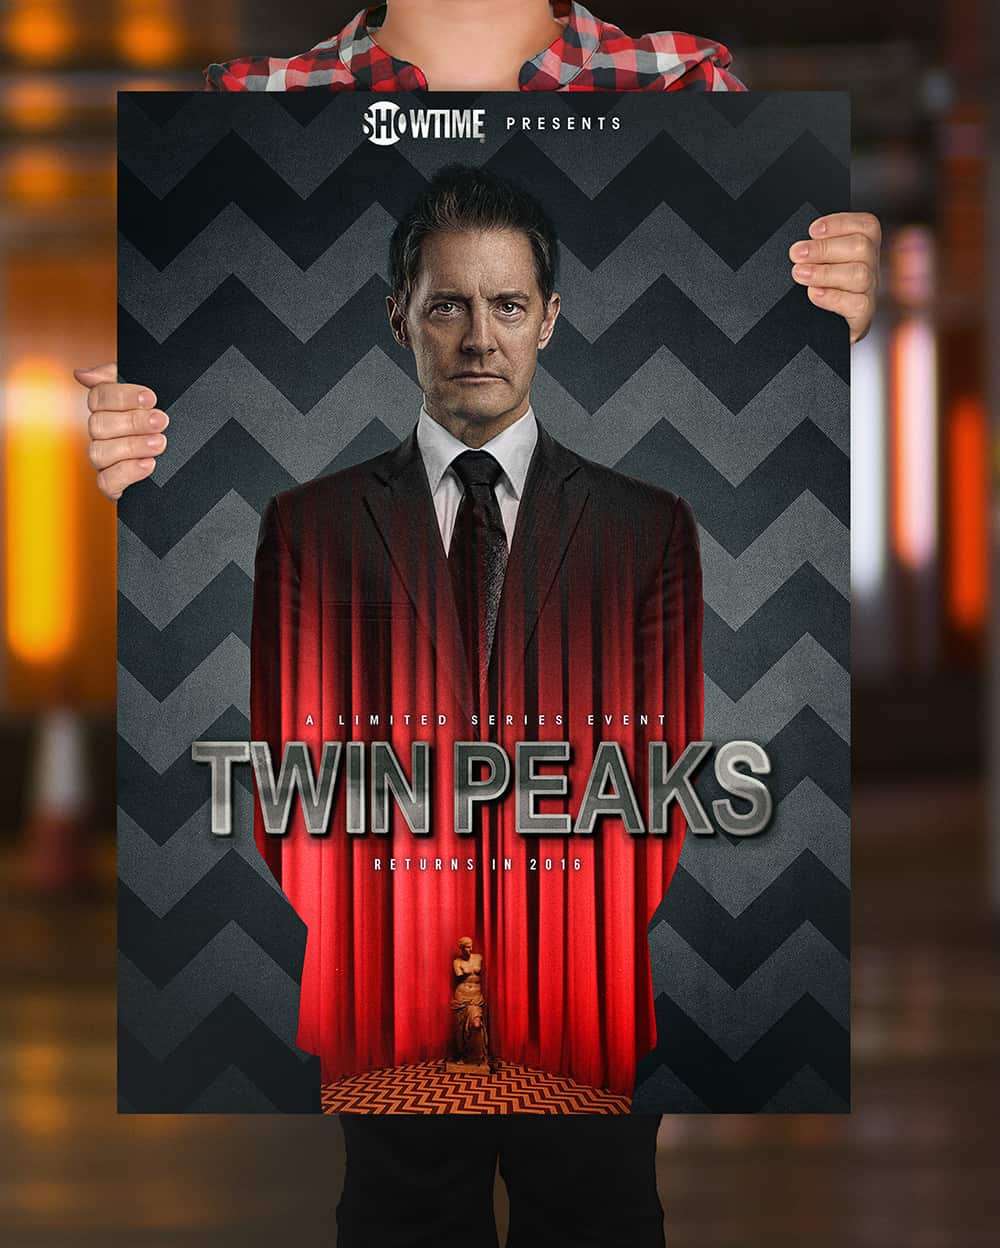 Twin Peaks Poster Campaign Envisions Dale Cooper On Billboards